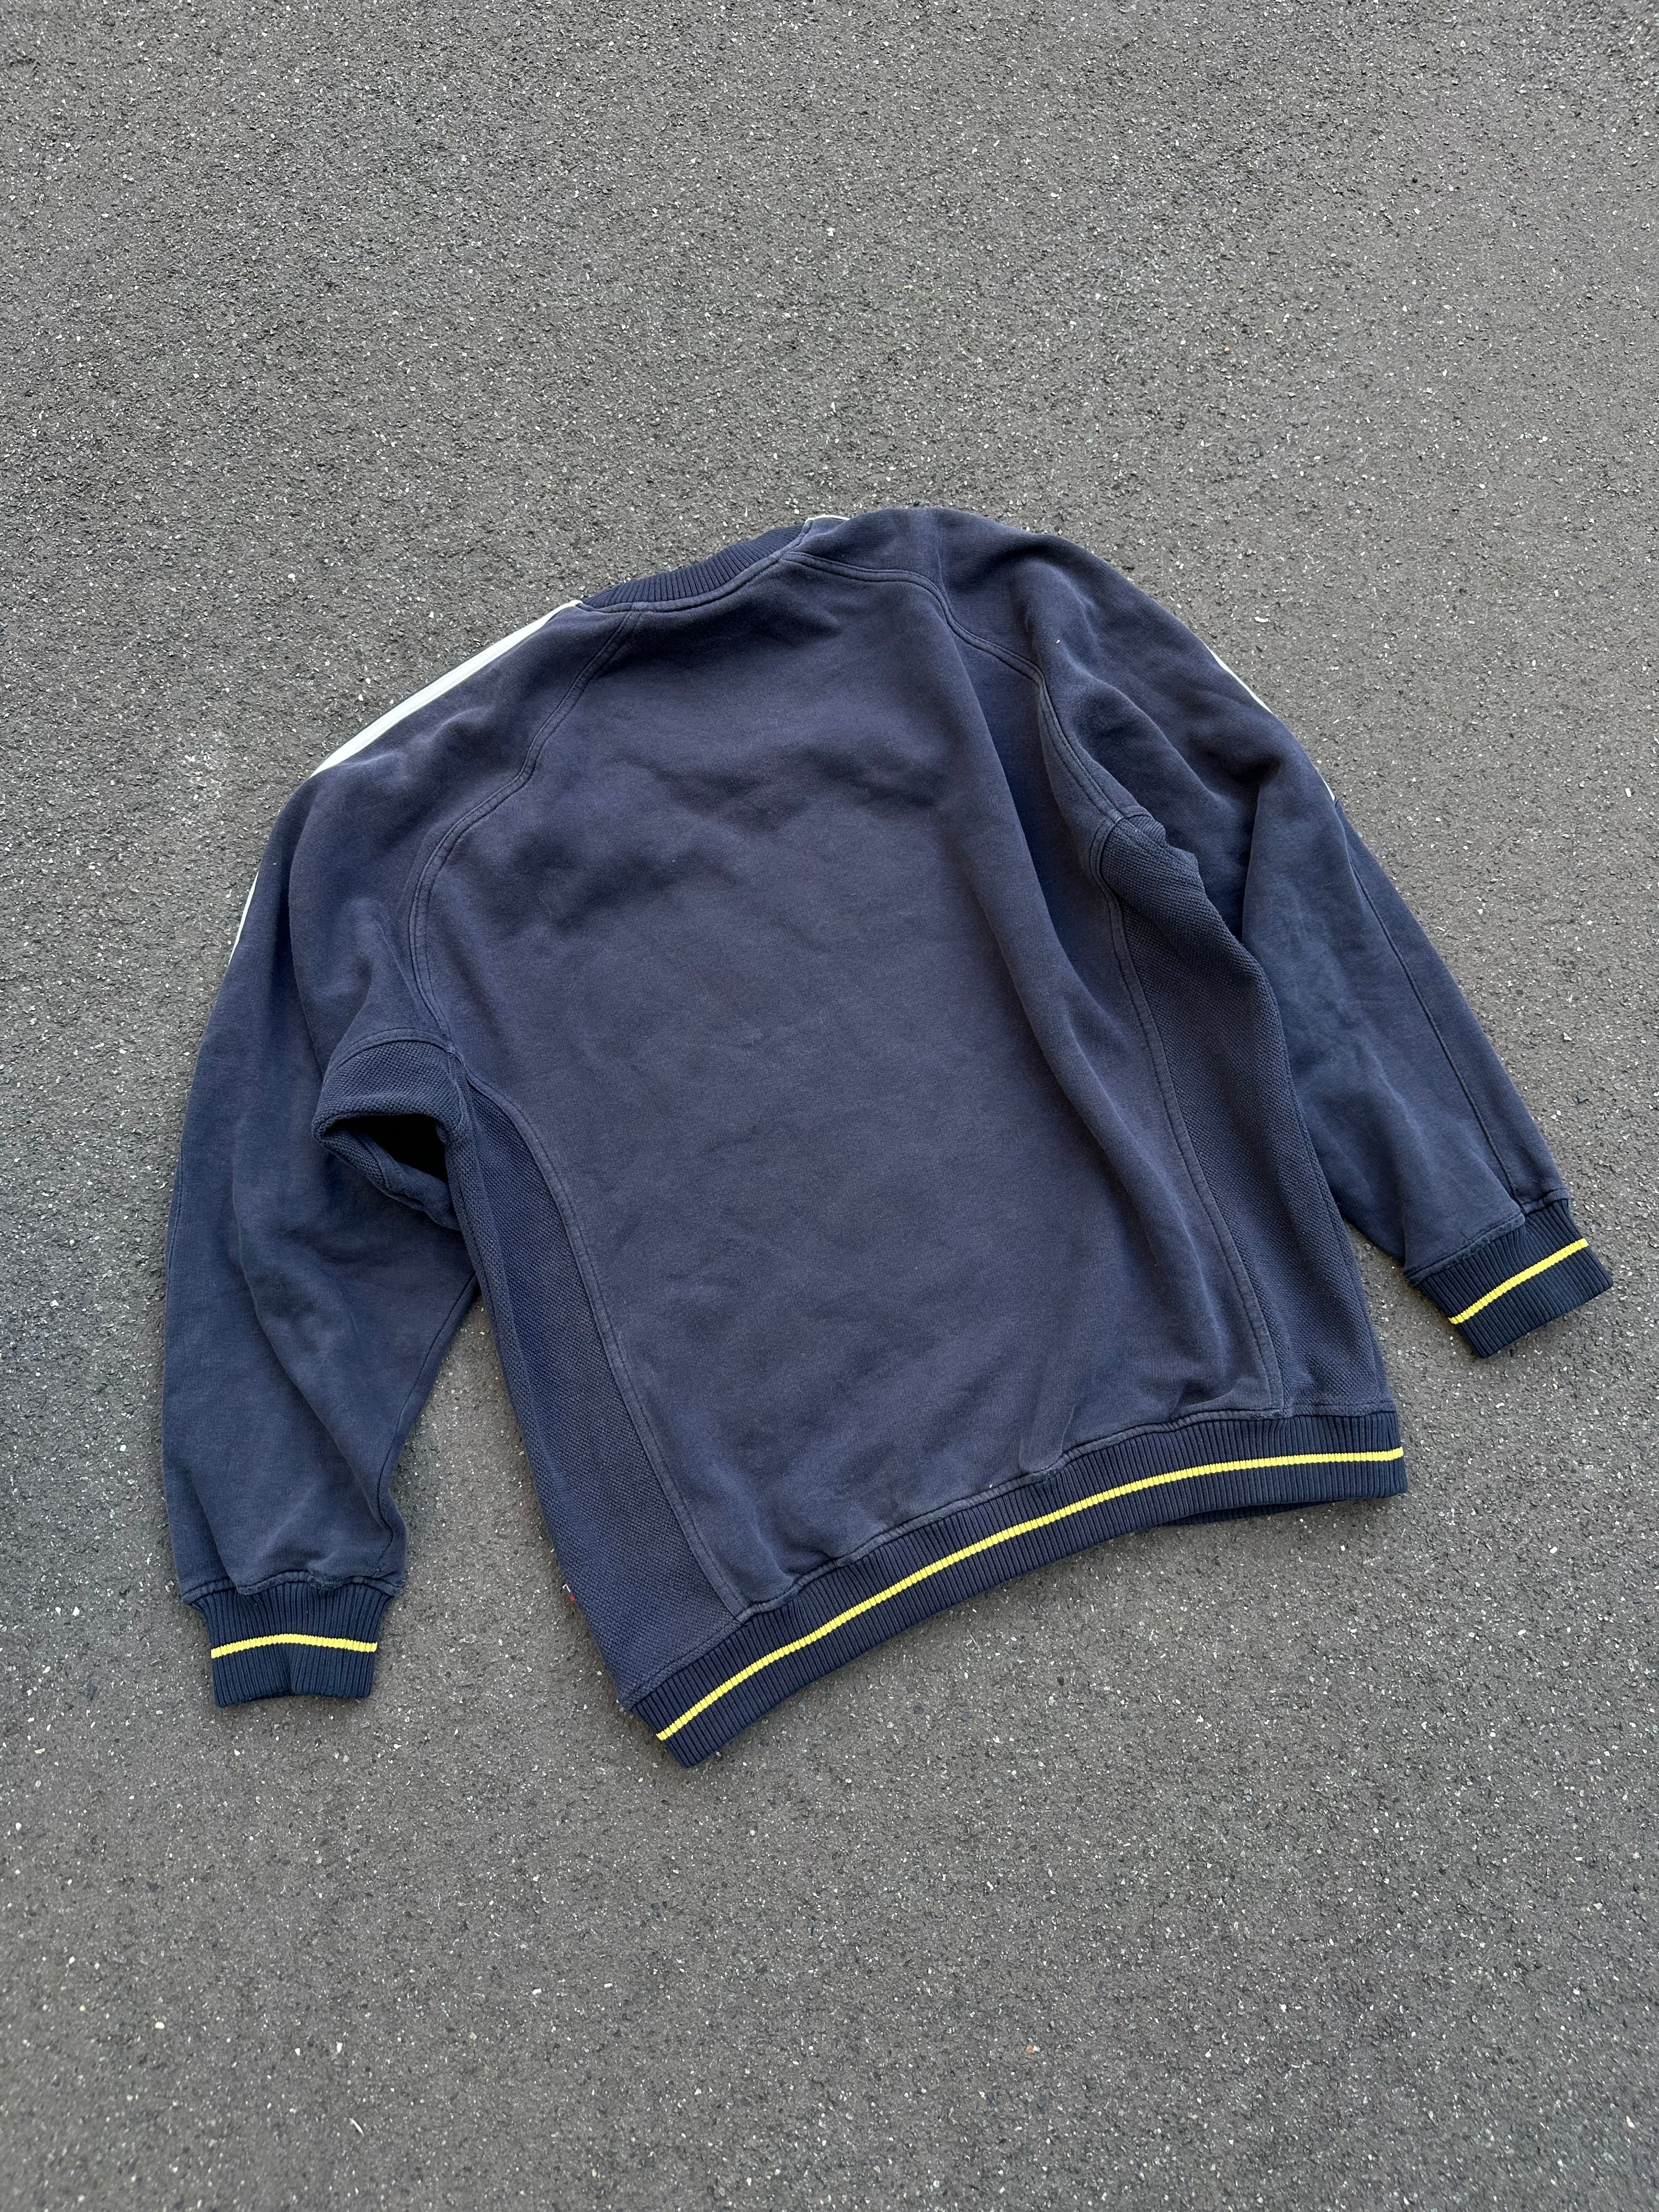 2000s Adidas embroidered Sweater (M)